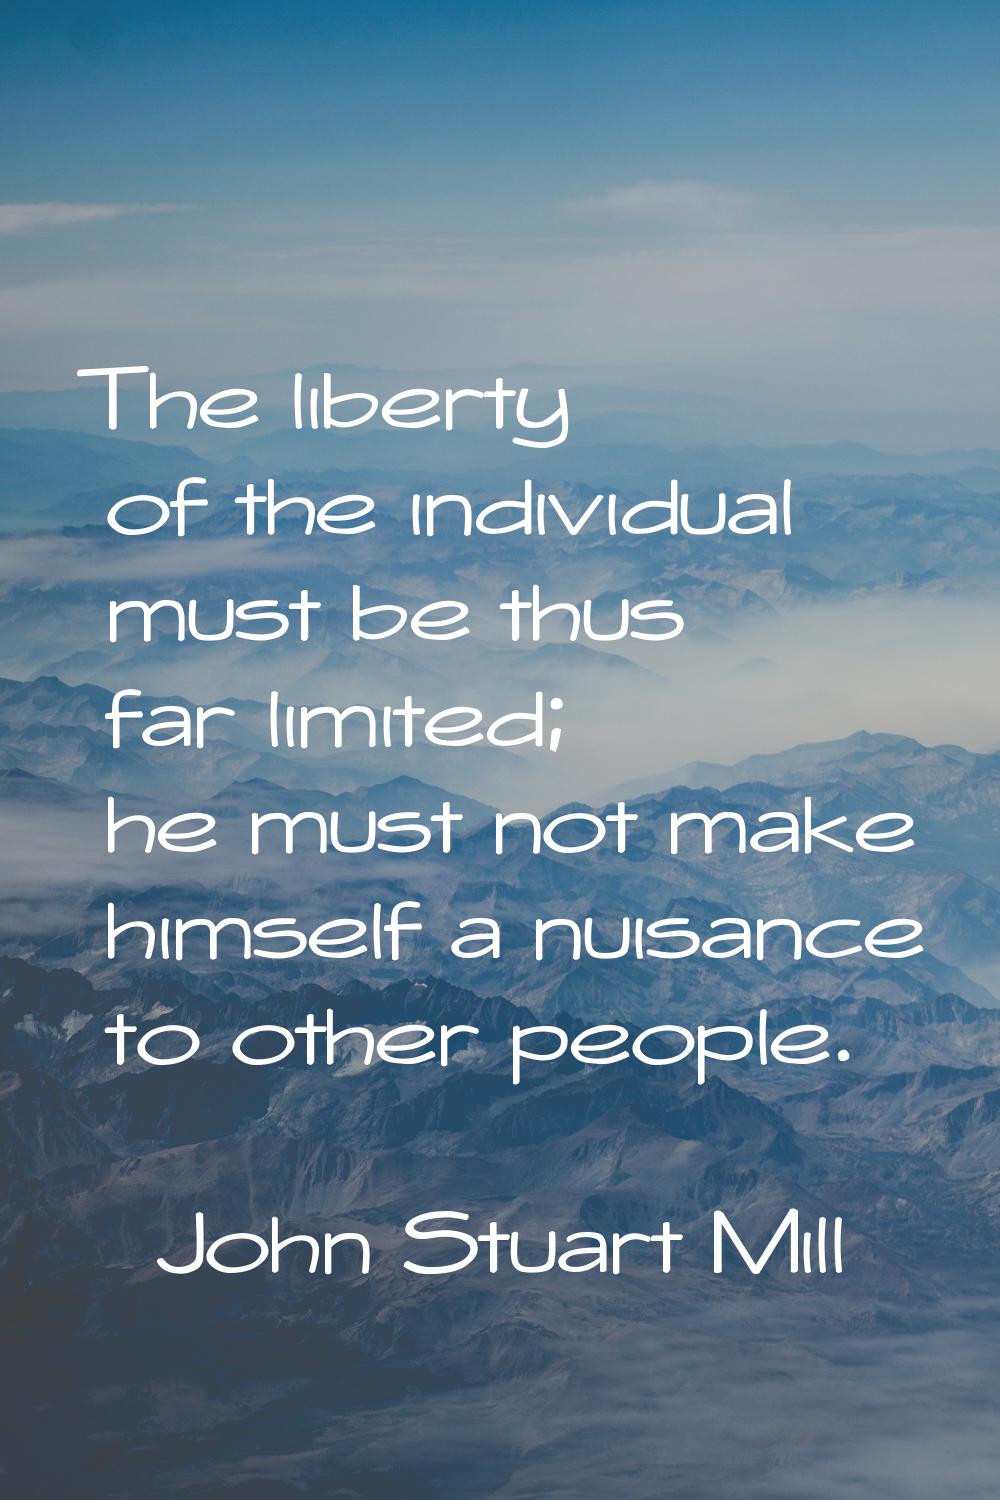 The liberty of the individual must be thus far limited; he must not make himself a nuisance to othe